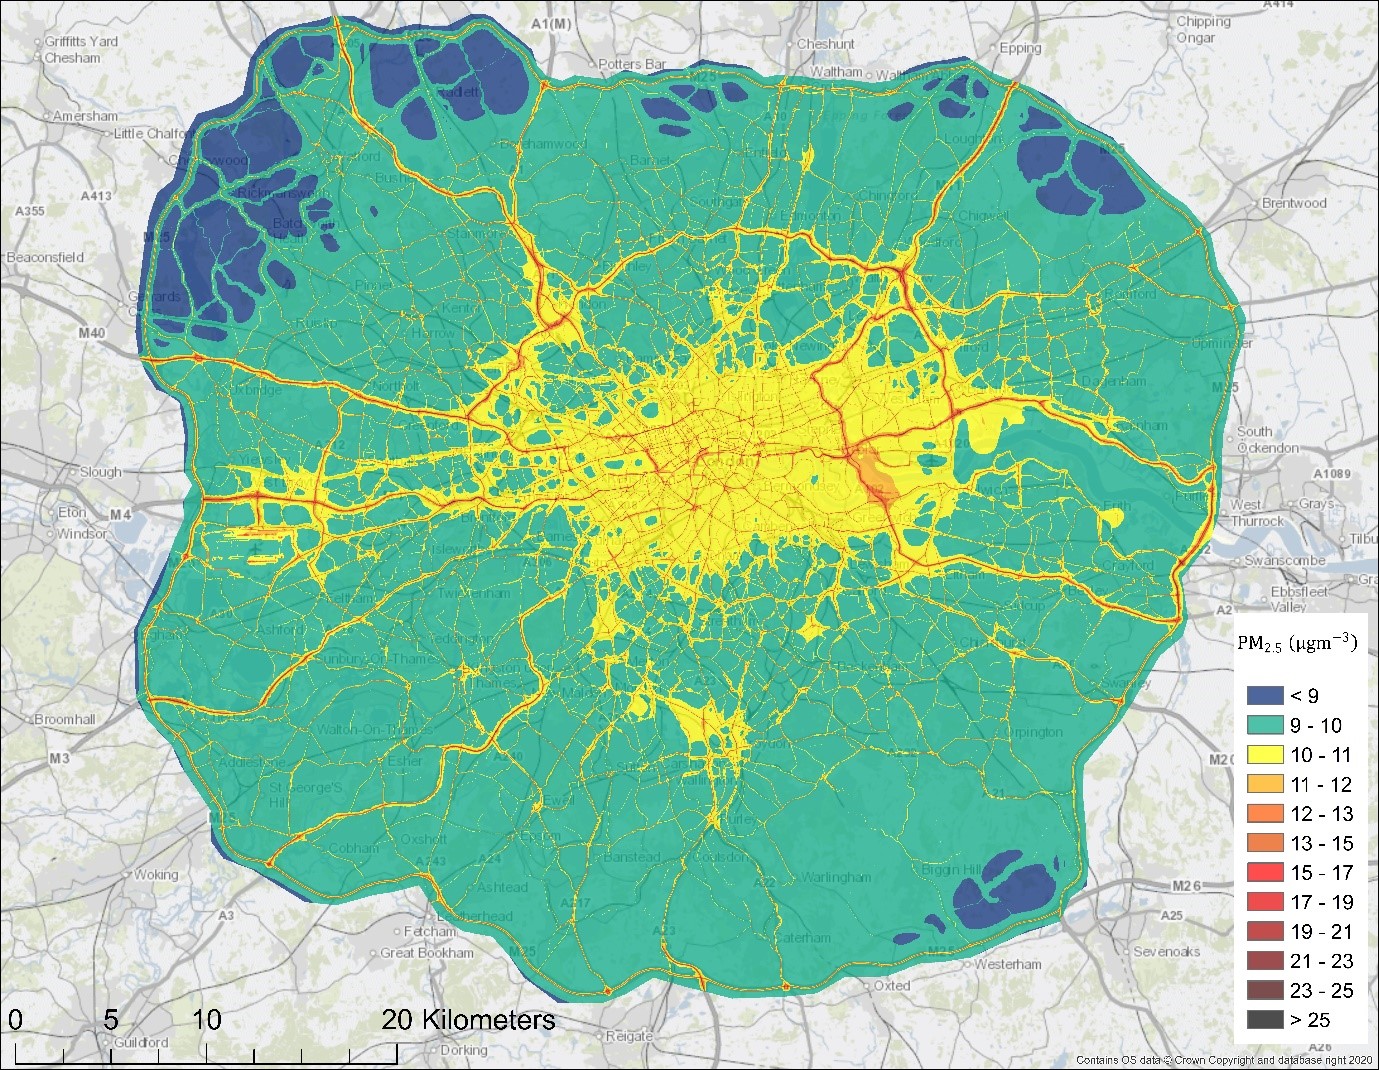 Image of London PM2.5 concentration for 2019, modelled by ADMS-Urban